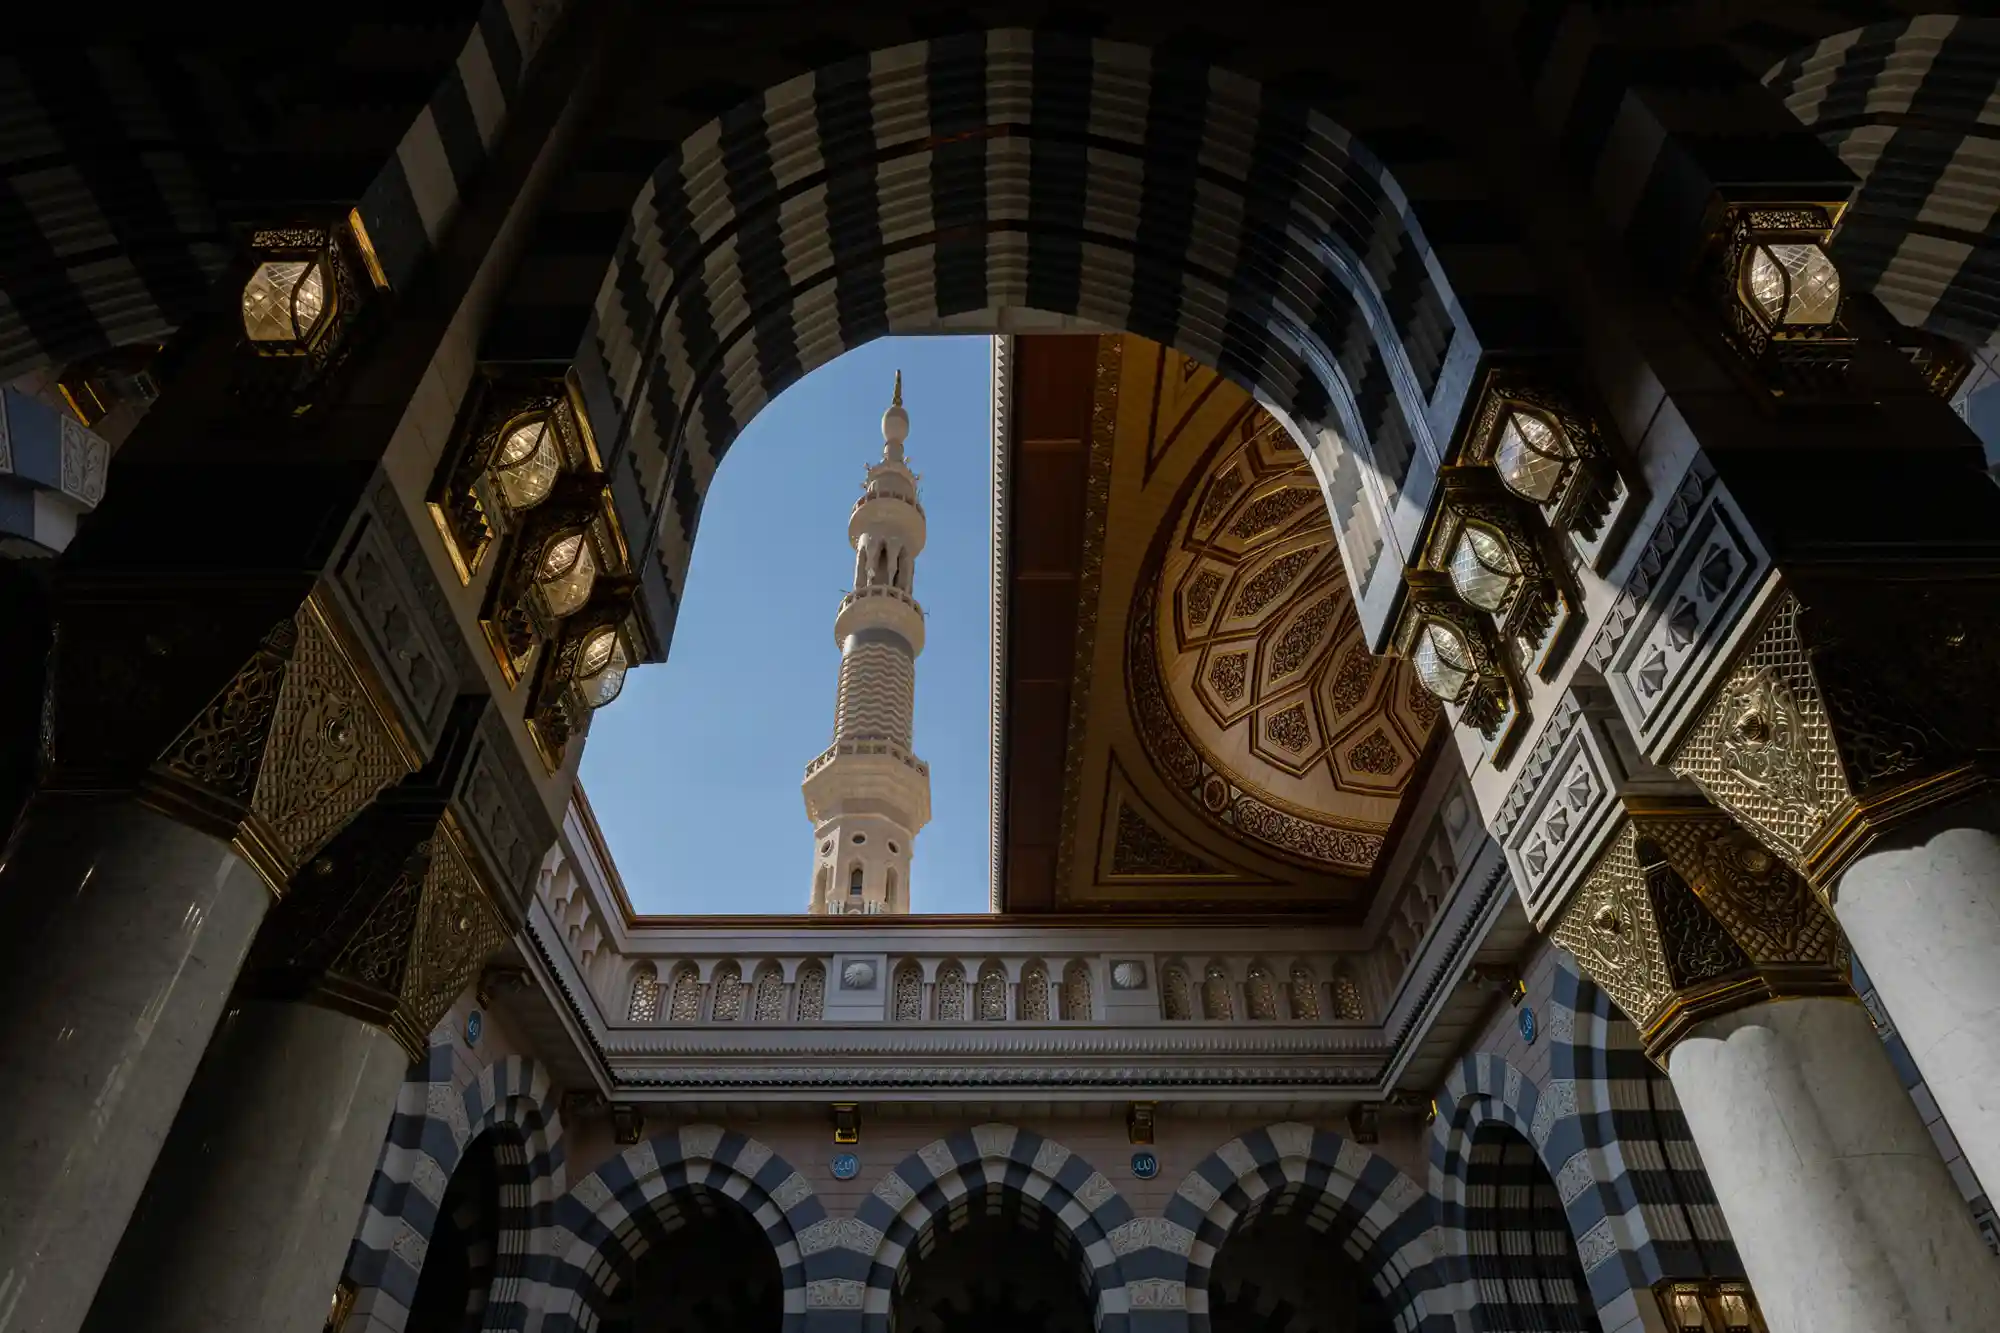 Domes and Giant Canopies of the Prophet's Mosque